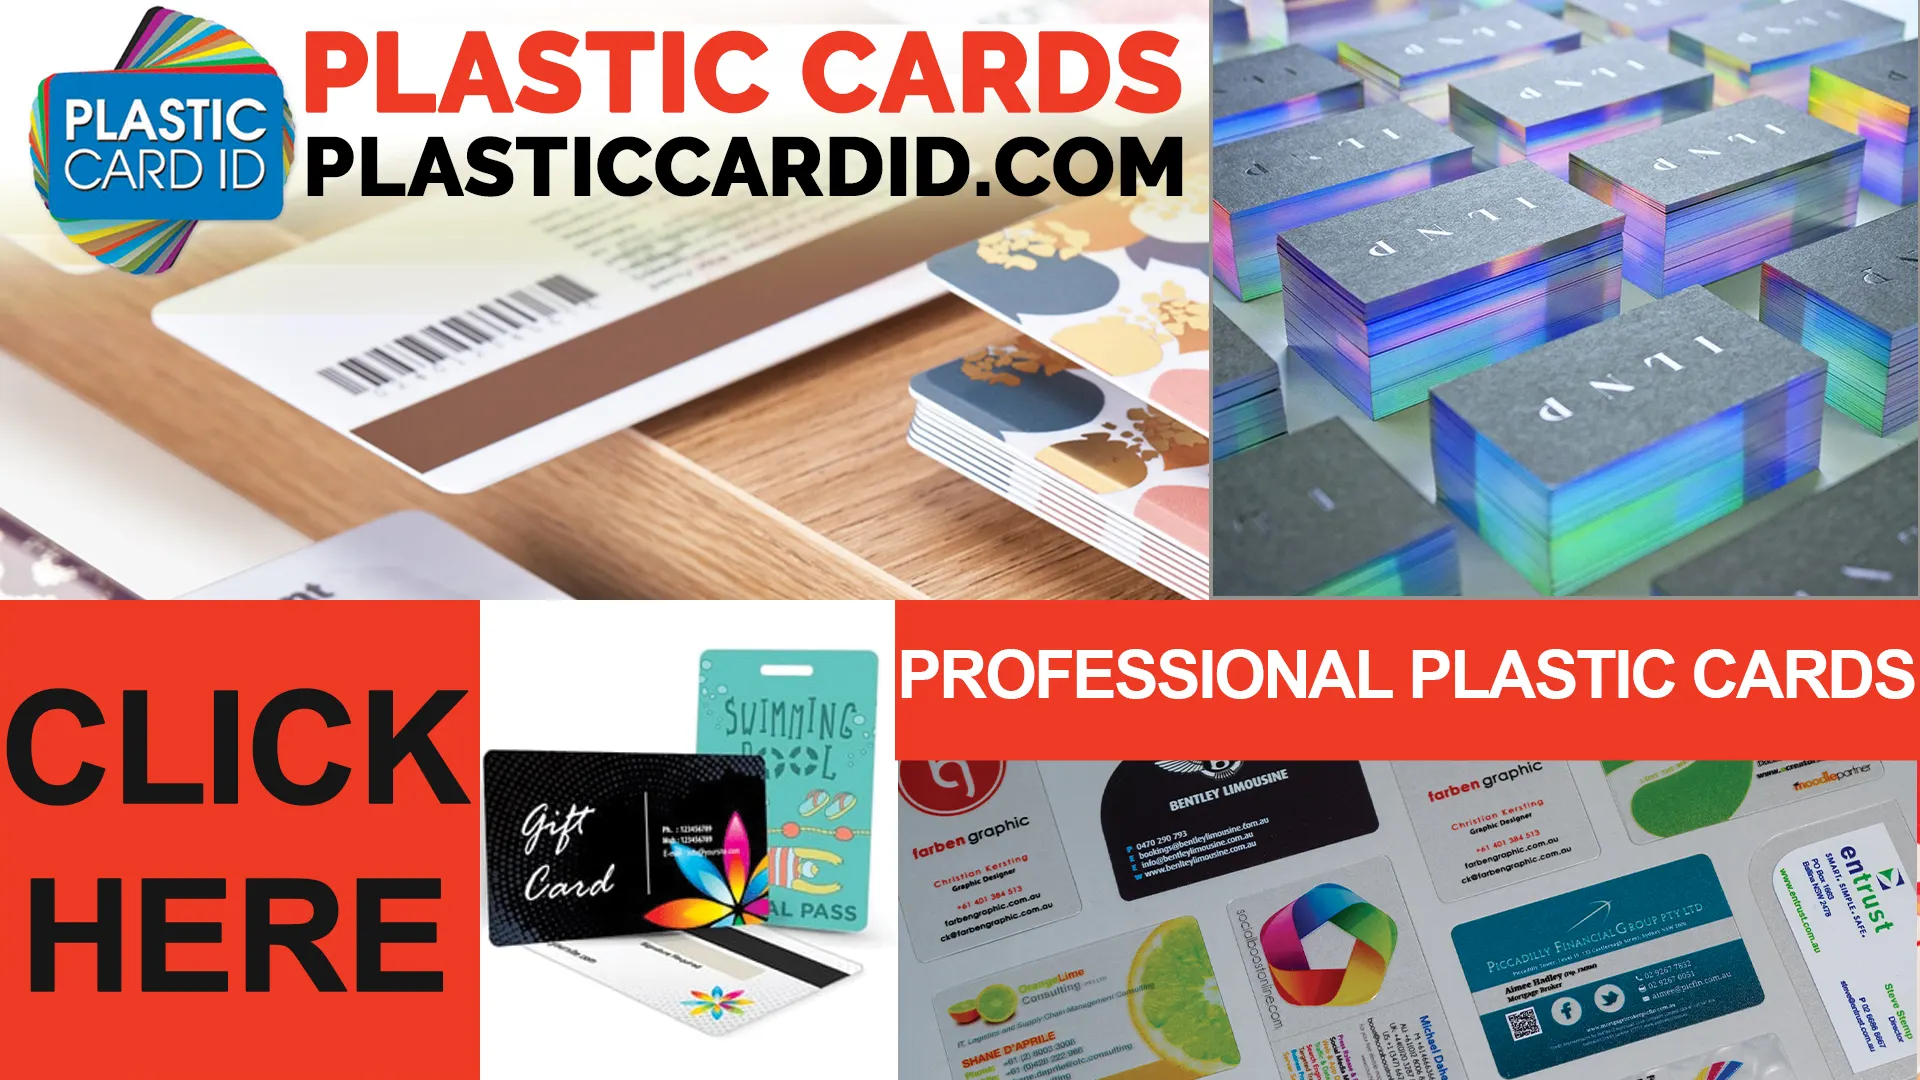 Endless Possibilities with Our Card Range